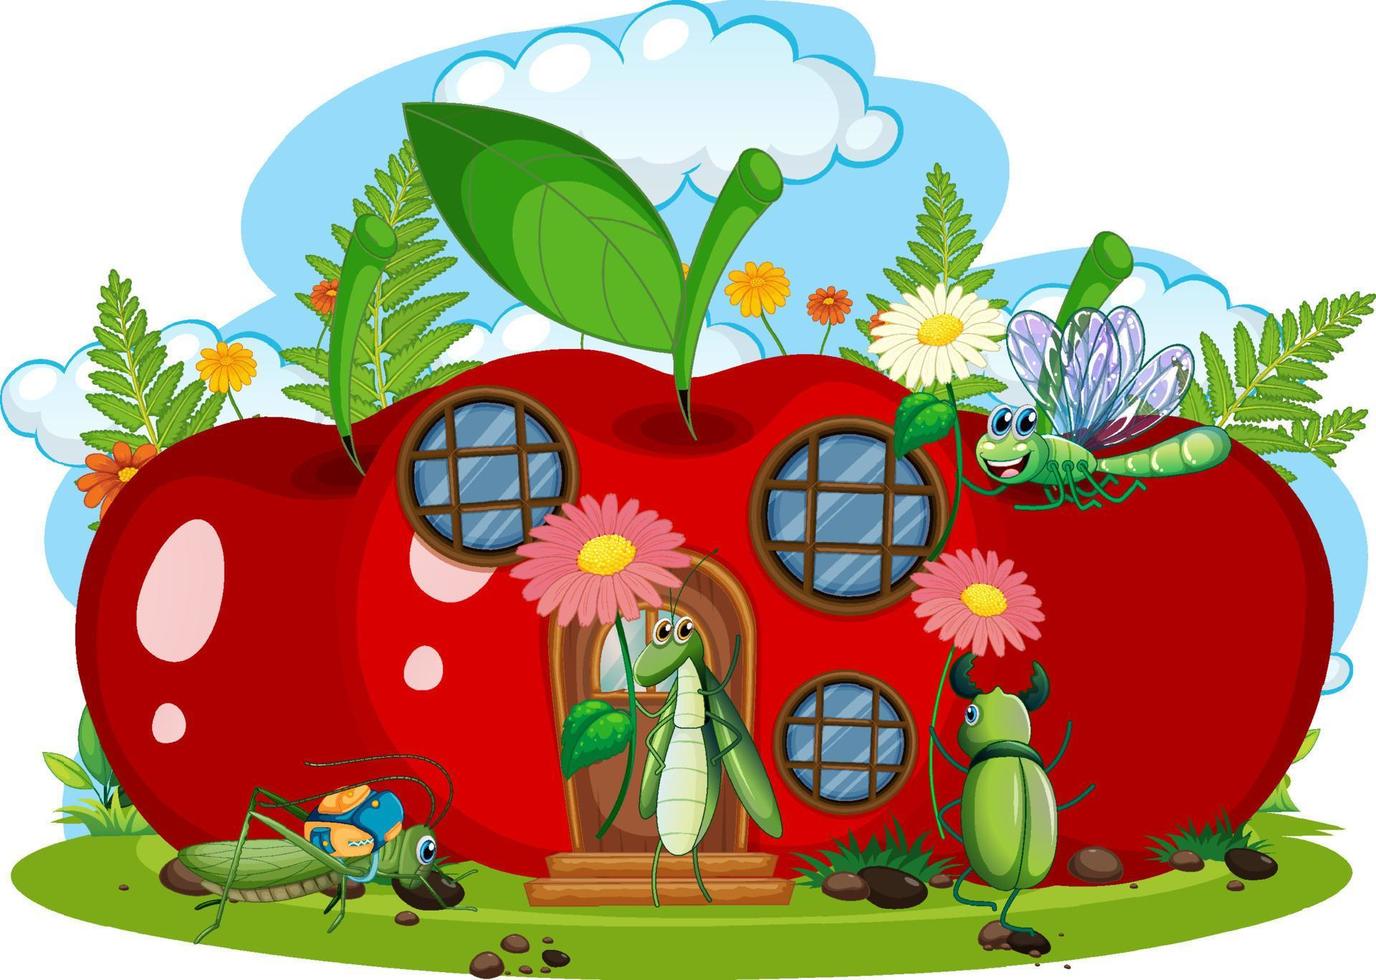 Fantasy apple house with cartoon insects vector